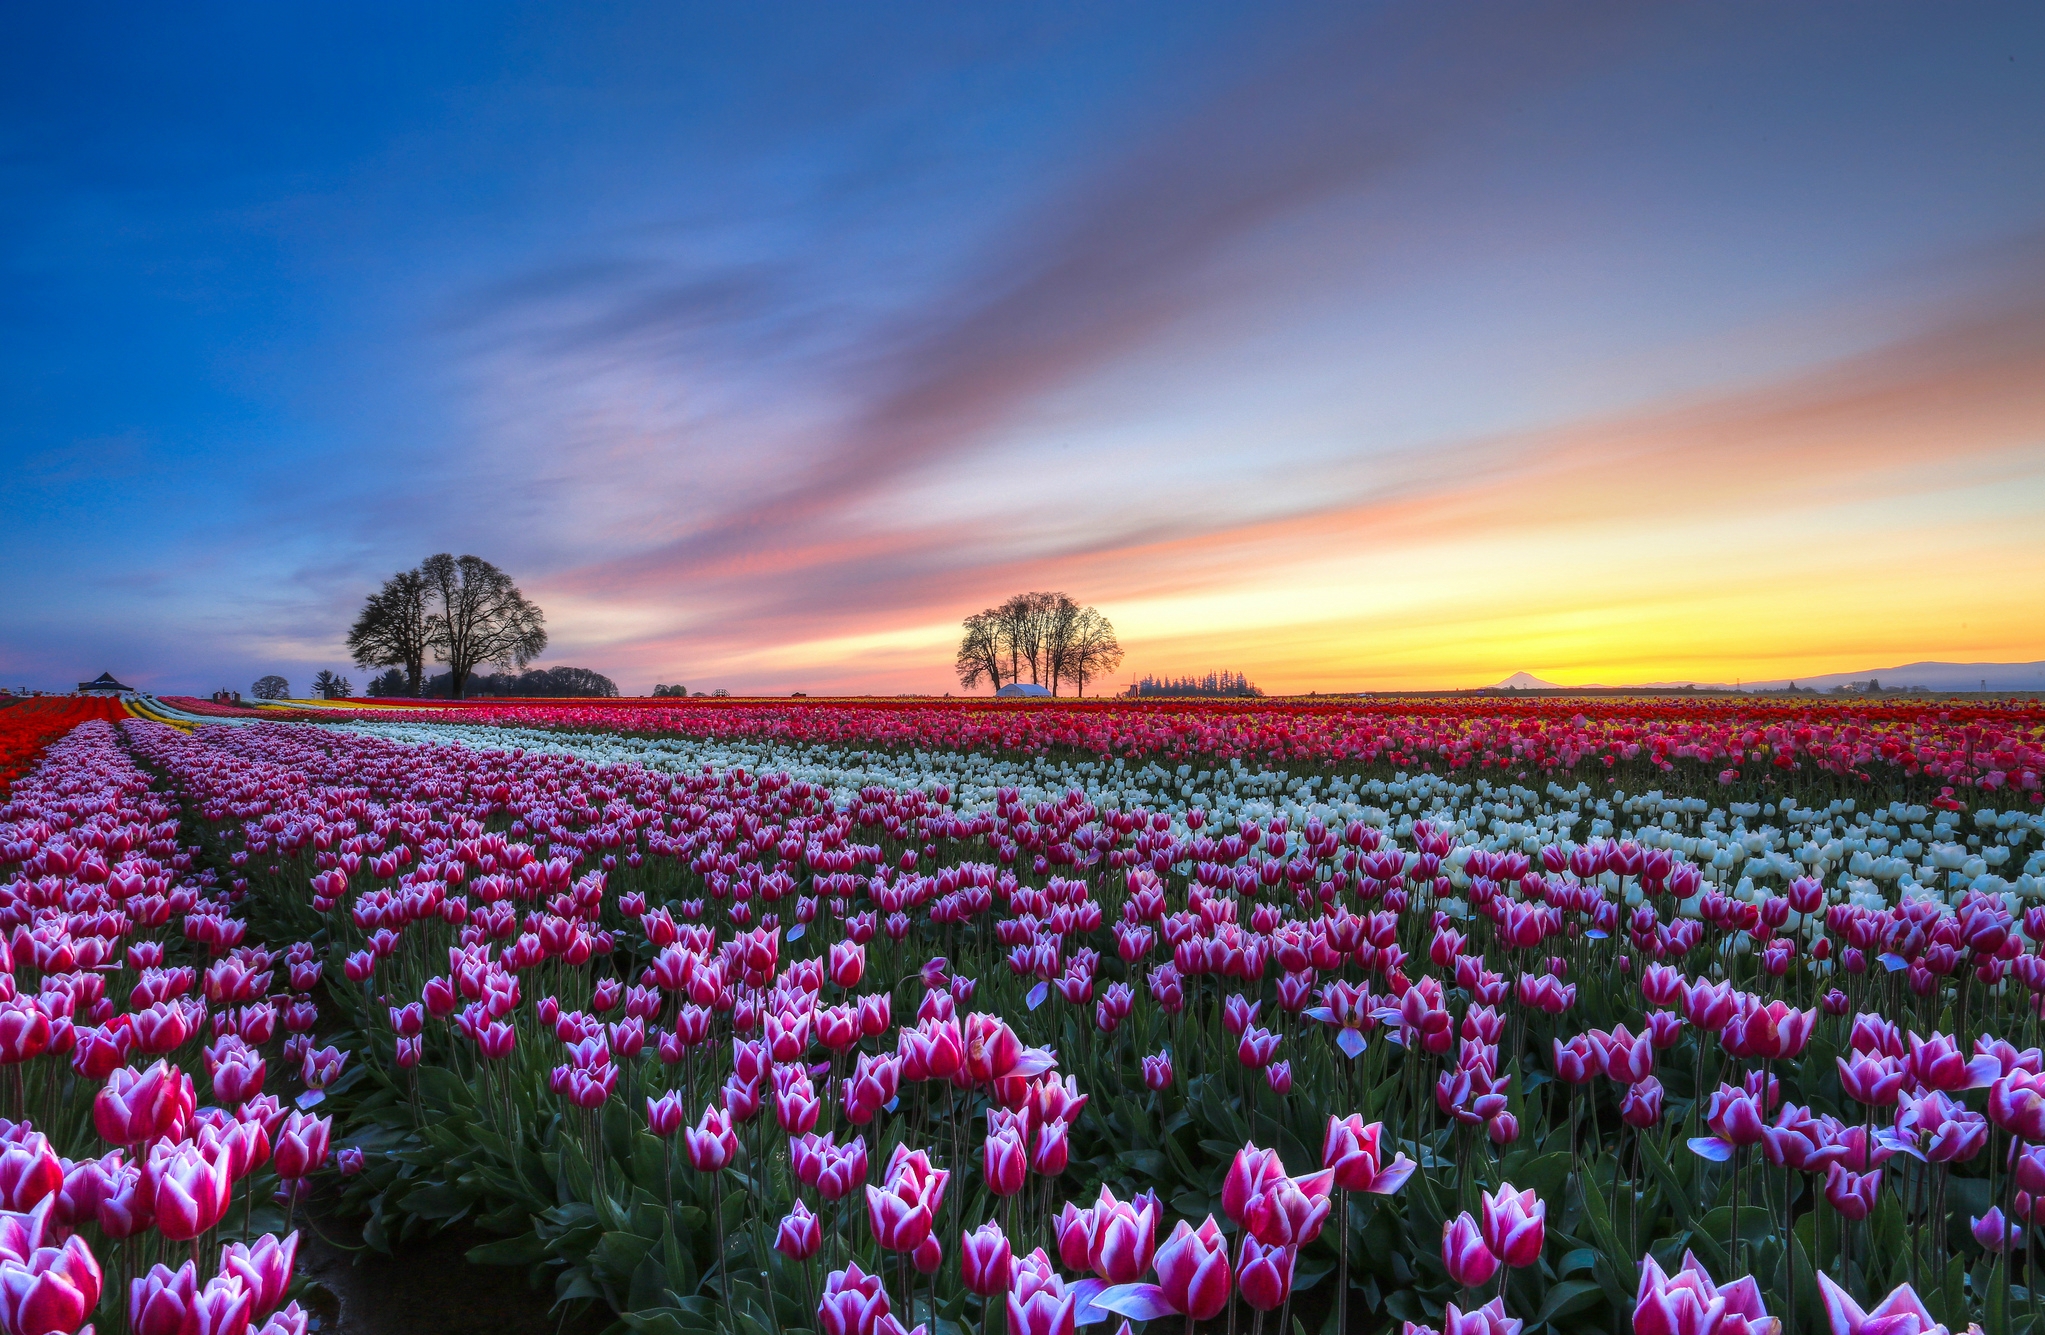 wallpapers nature, trees, sky, tulips, multicolored, evening, flowers, sunset, clouds, field